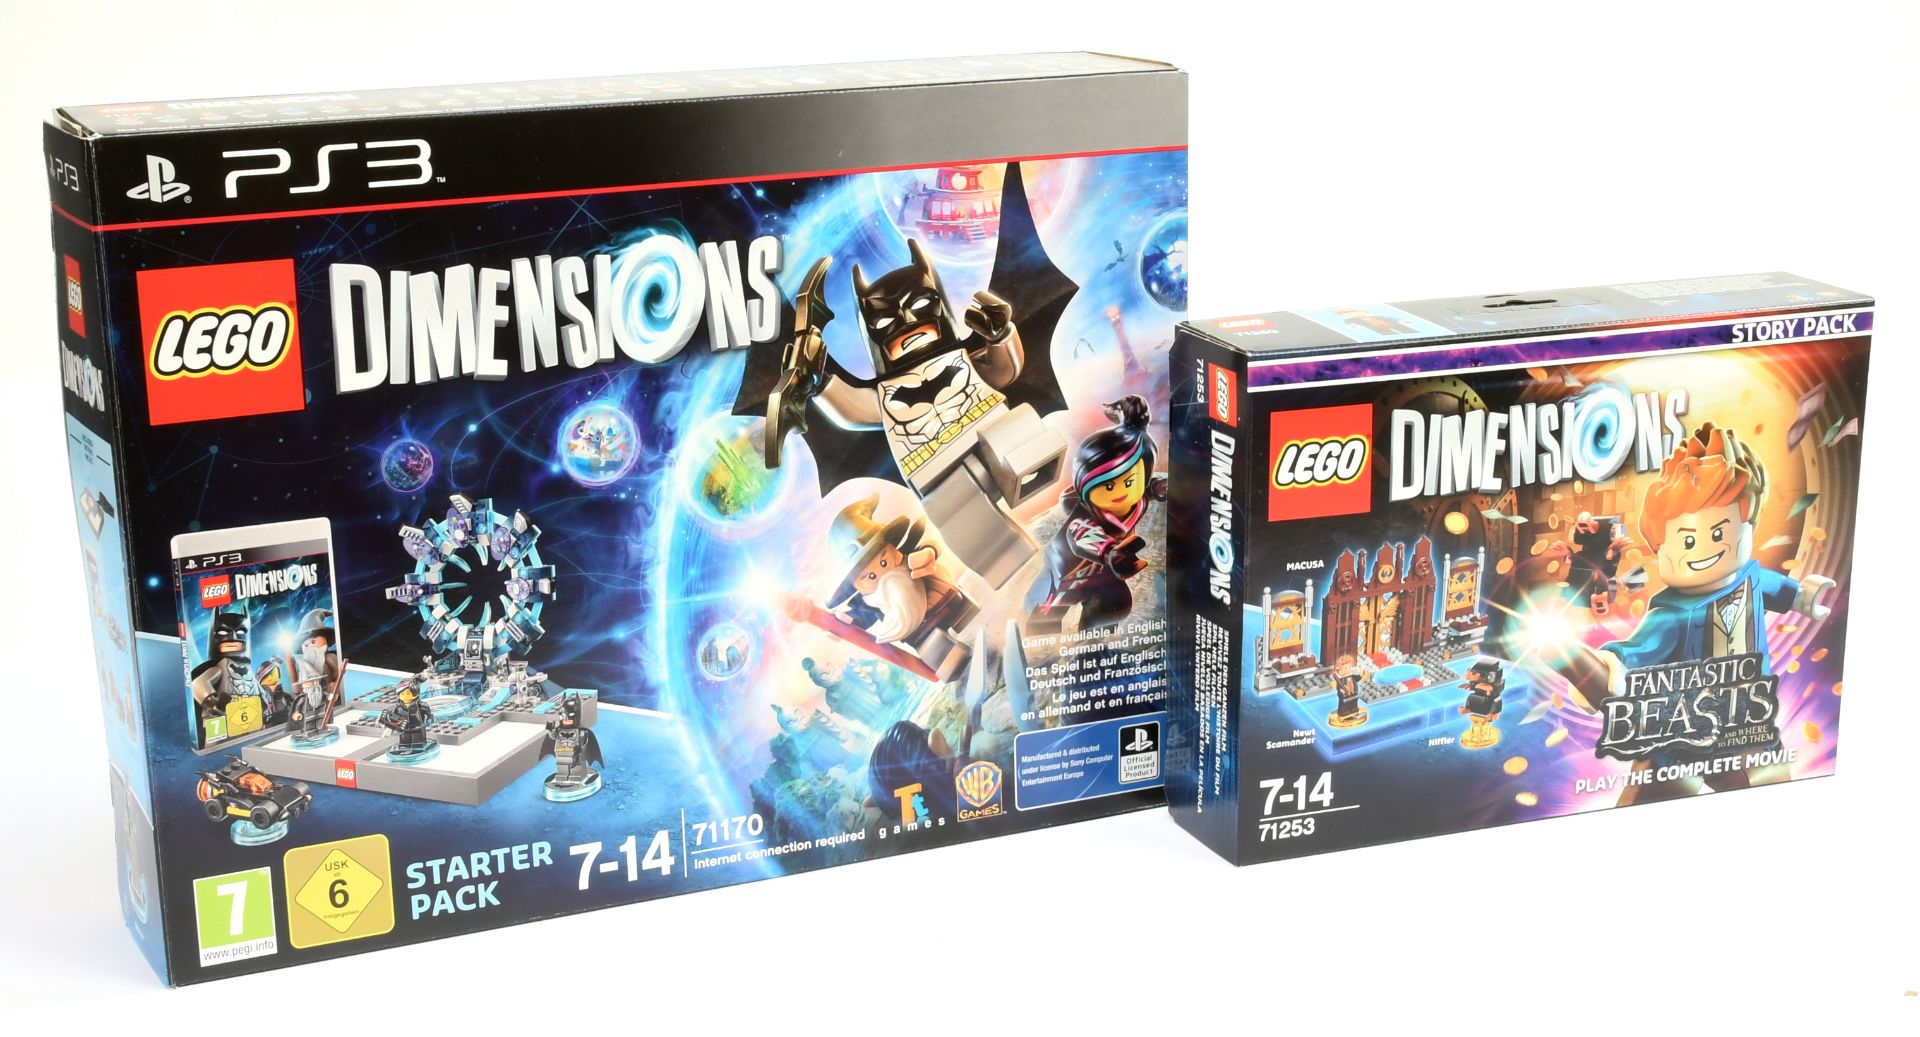 Lego Dimensions sets to include PS3 71170 Starter pack, 71253 Fantastic beasts Story pack. Both w...